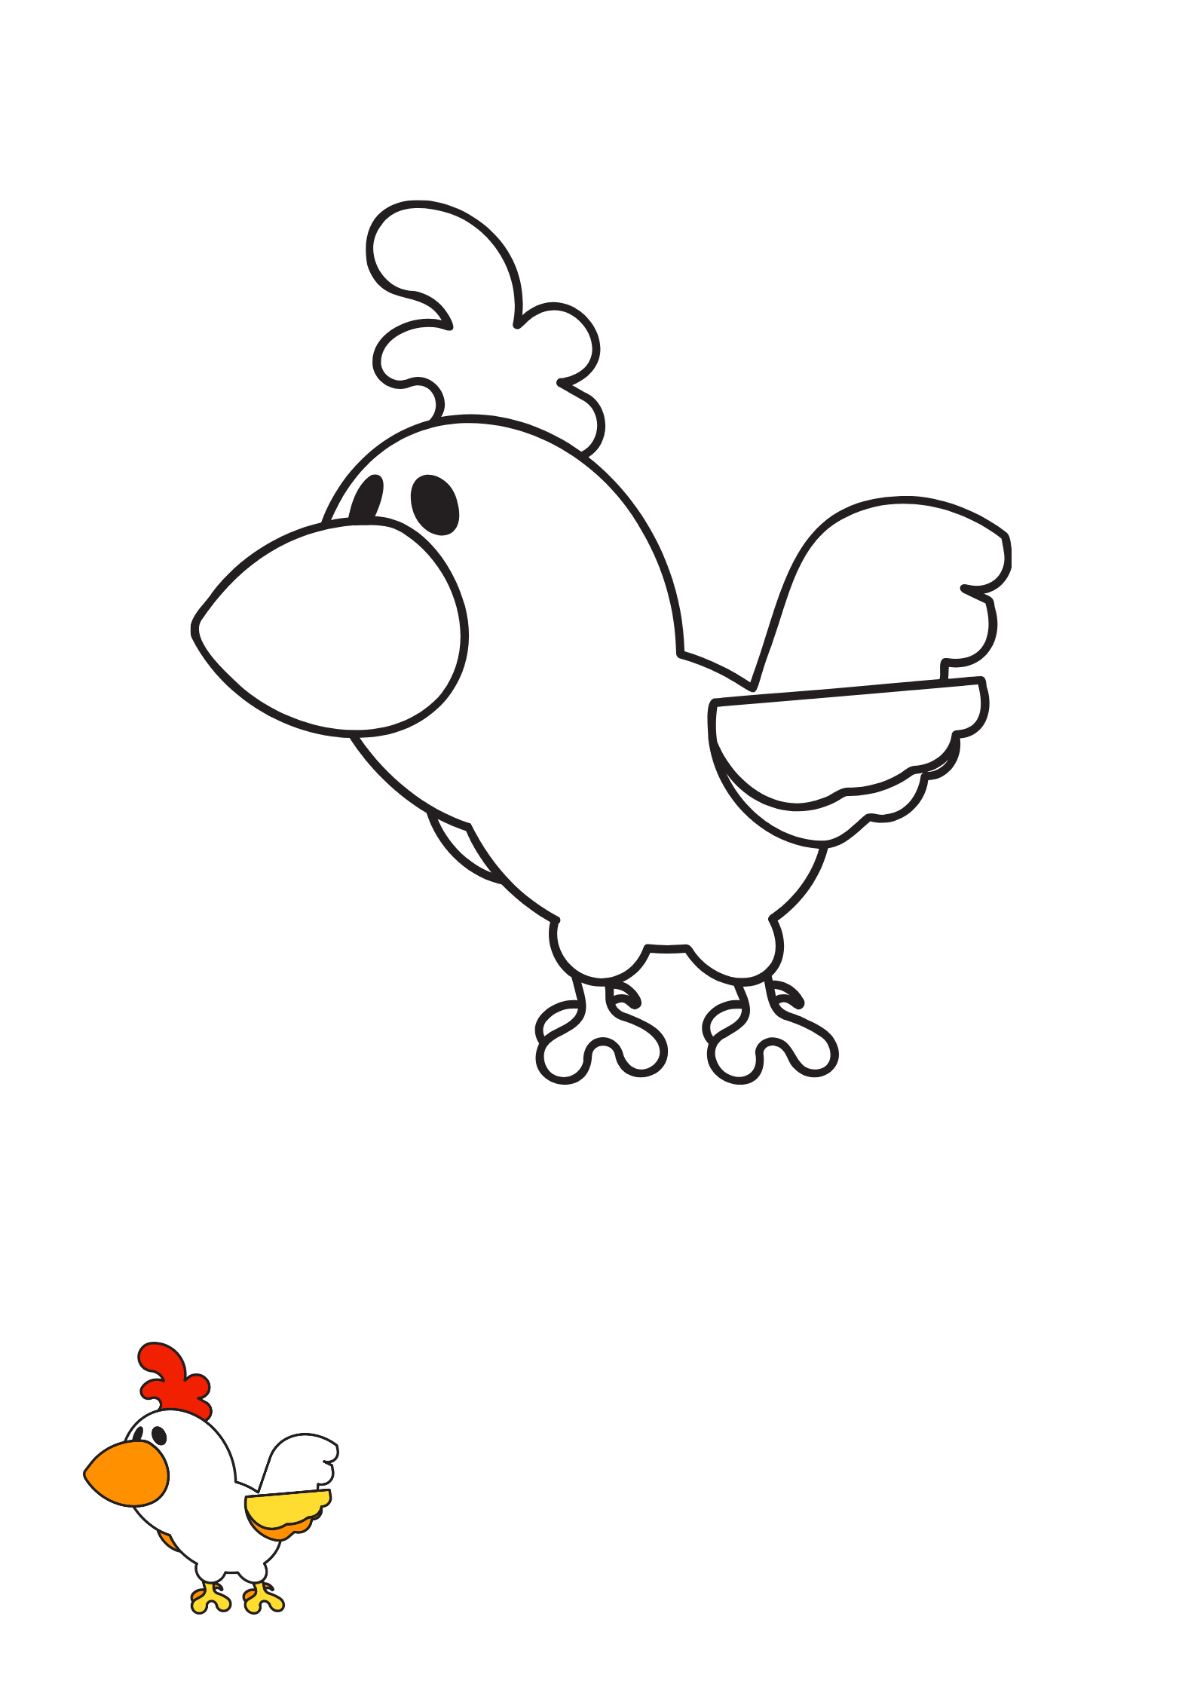 Chicken Cartoon Coloring Page Template